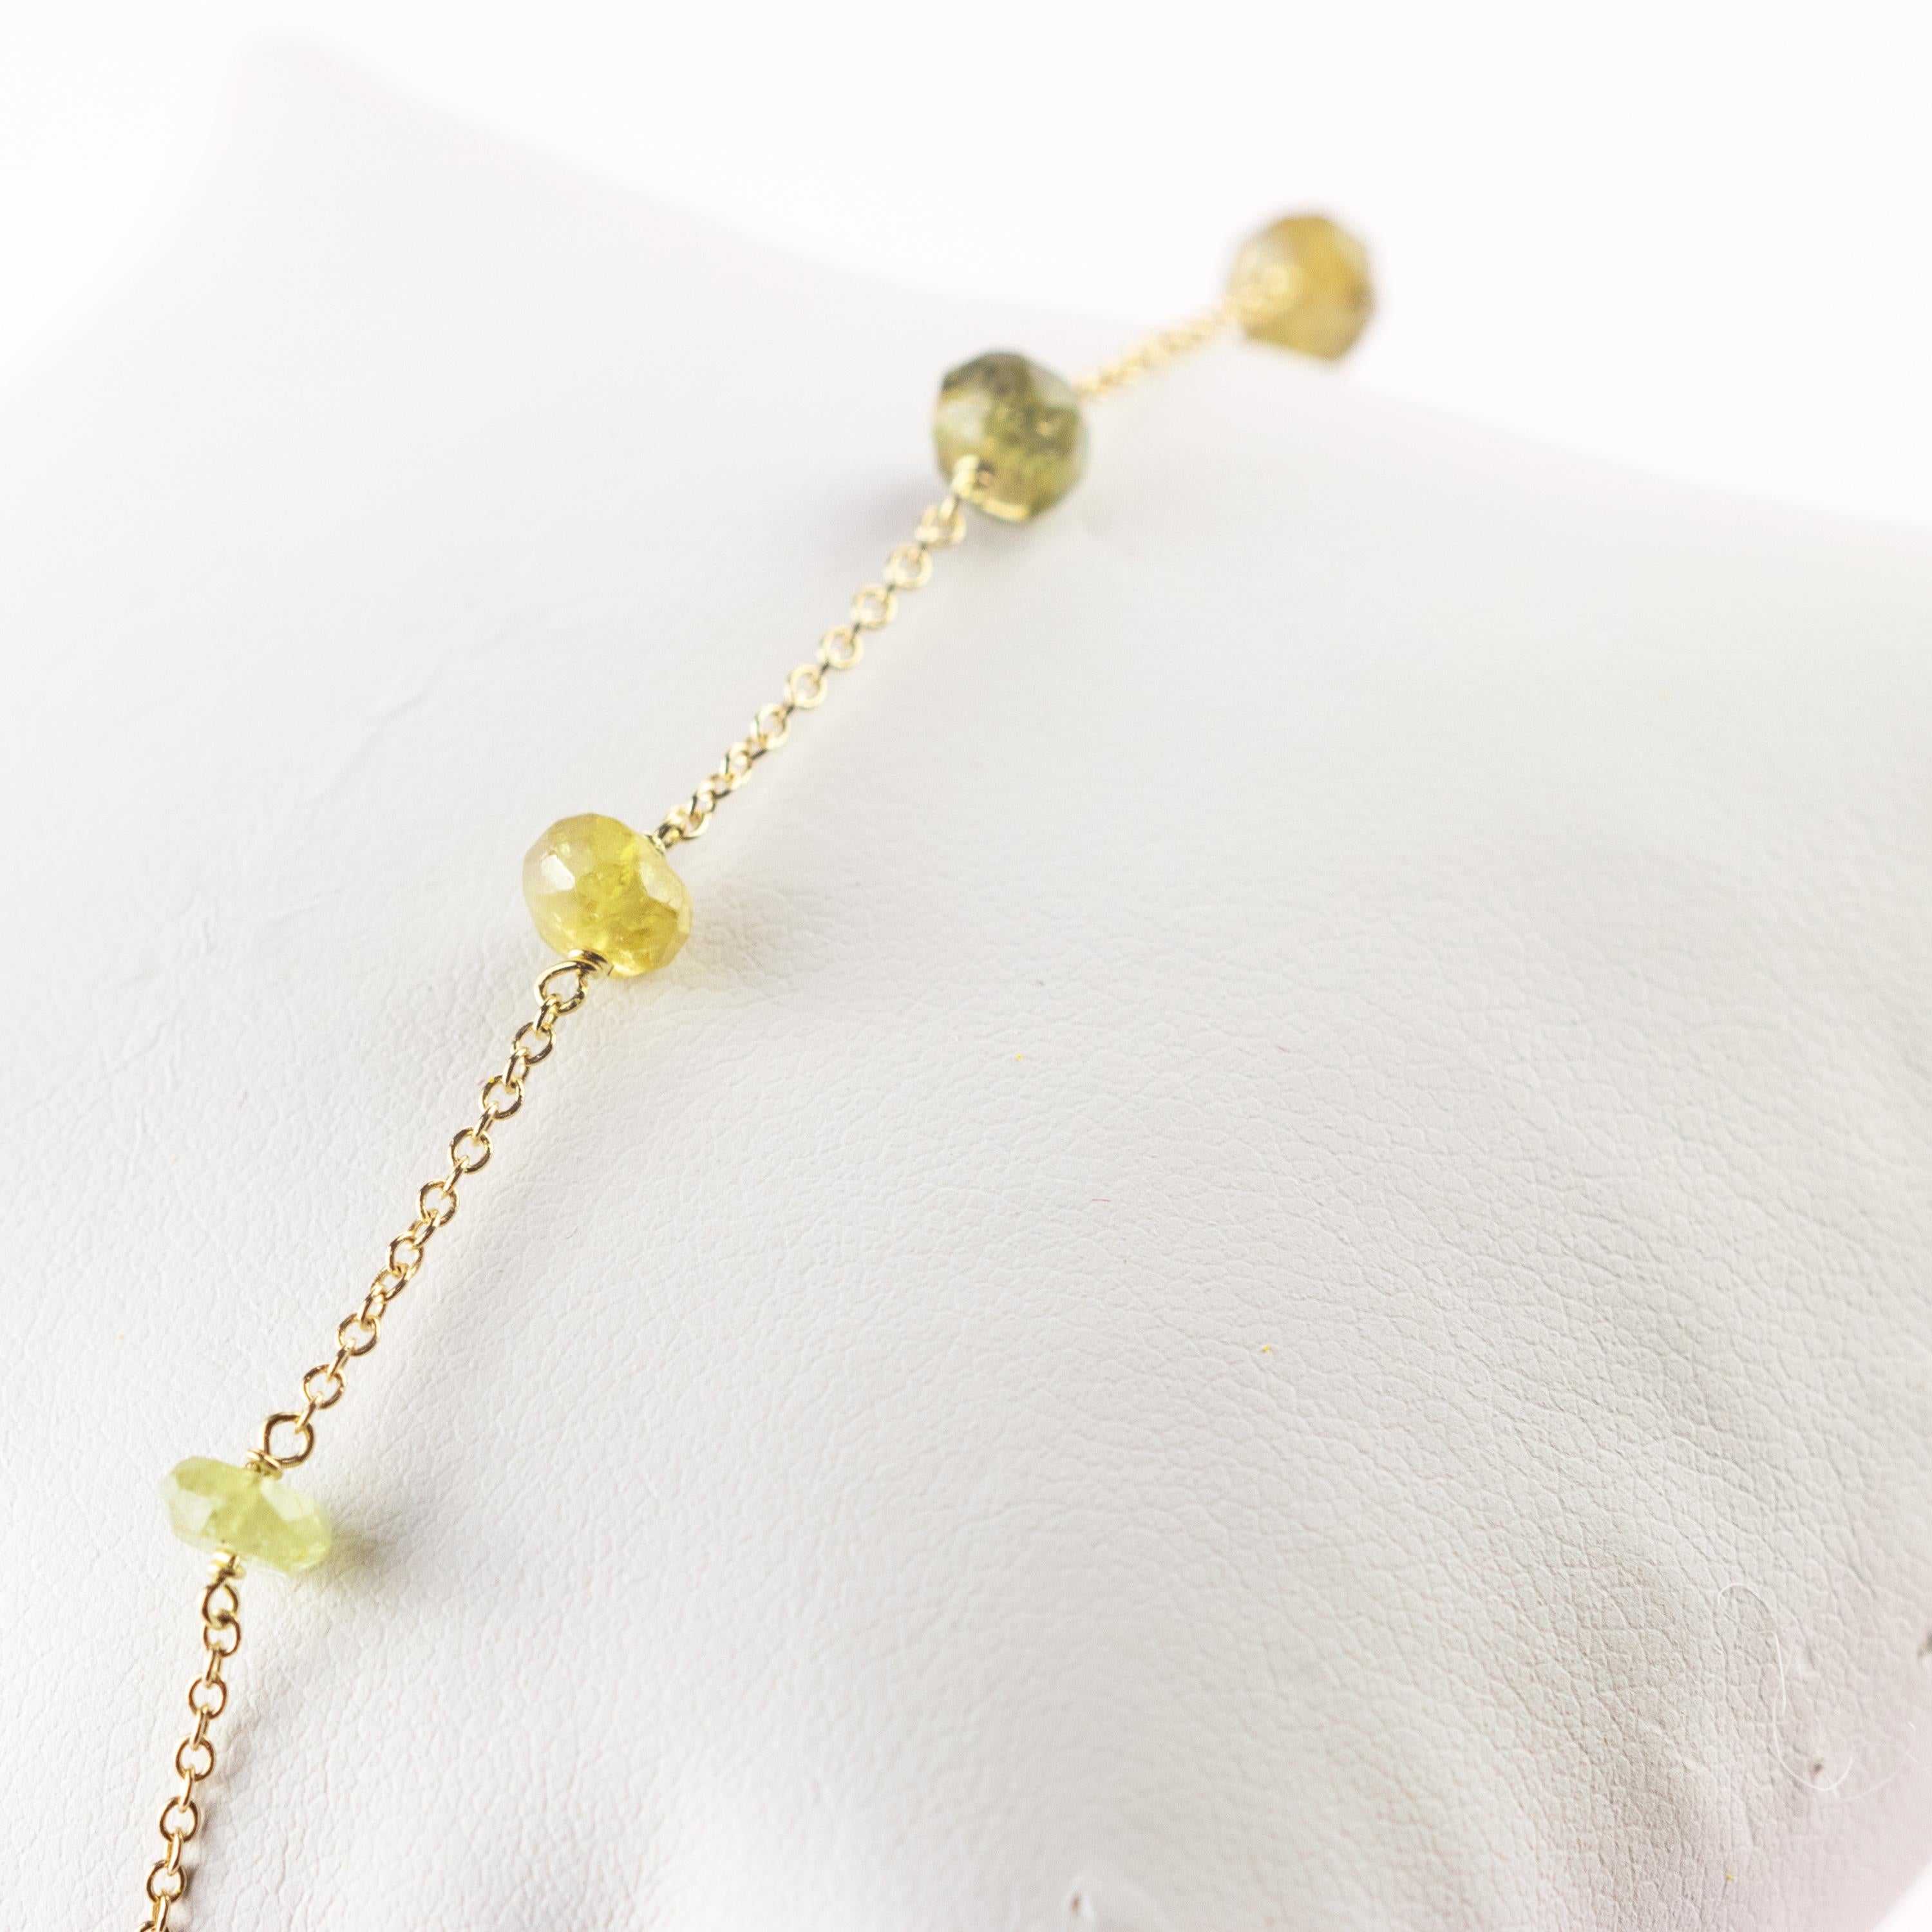 Marvellous bracelet starring natural green tourmaline rondelles gems, for a bright charm of uniqueness. Luminous jewel with natural precious jewellery on elegant Gold Plate setting.  Anklet and Bracelet

Green represents abundance, renewal, growth